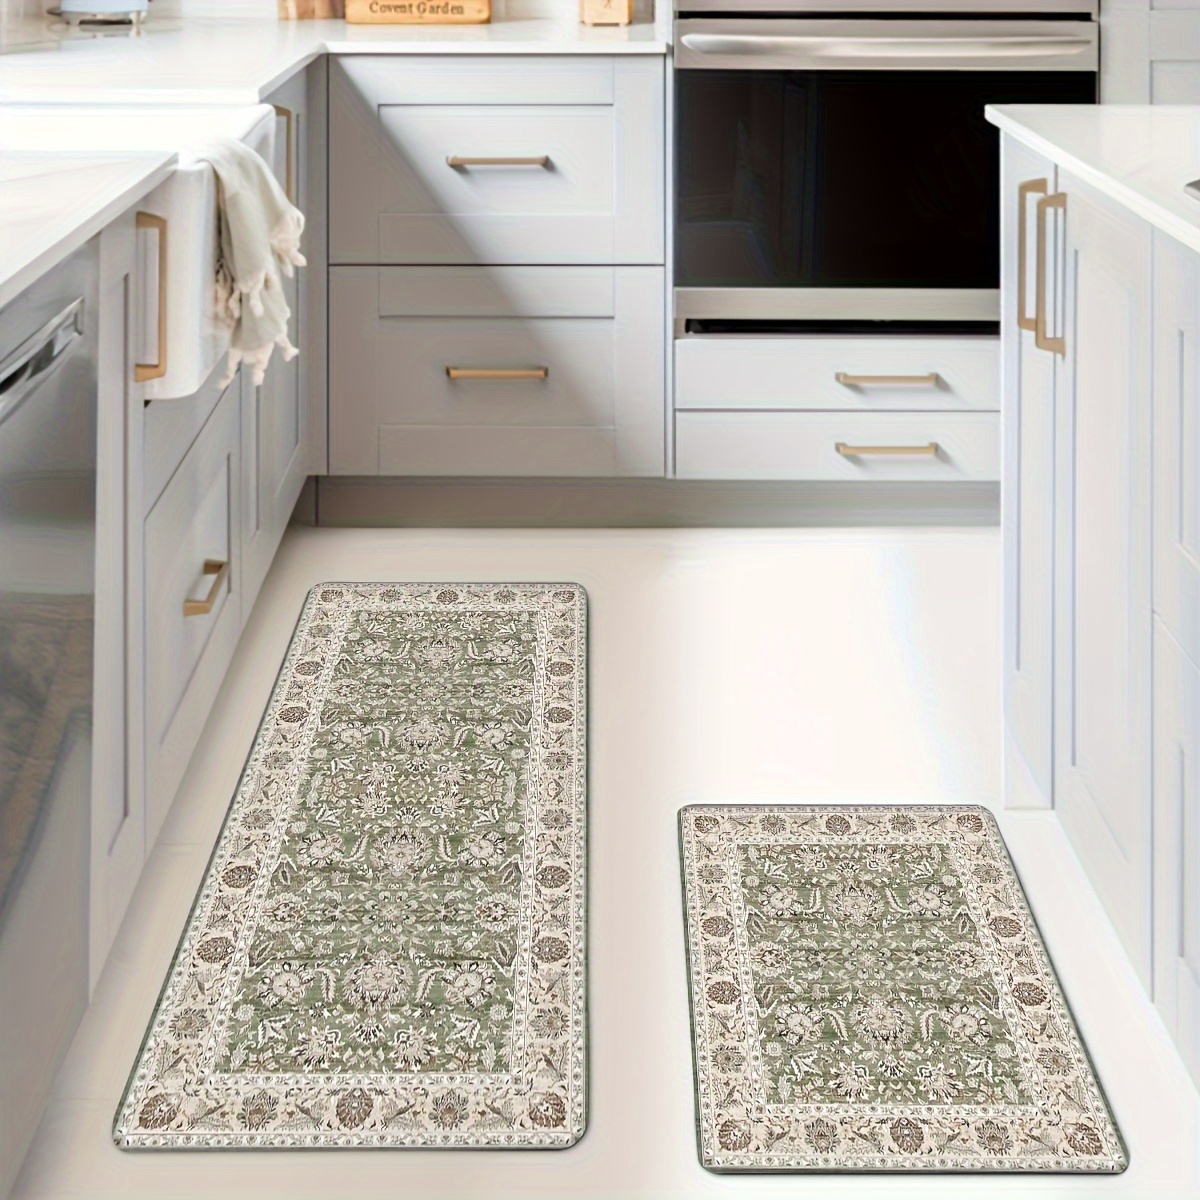 

Non-slip Kitchen Runner Rugs Set - 3 Pieces, Machine Washable, Polyester, Rectangle Mats For Bedroom, Living Room, Laundry, Bathroom - Includes Sizes 40x60cm, 50x80cm, 40x120cm